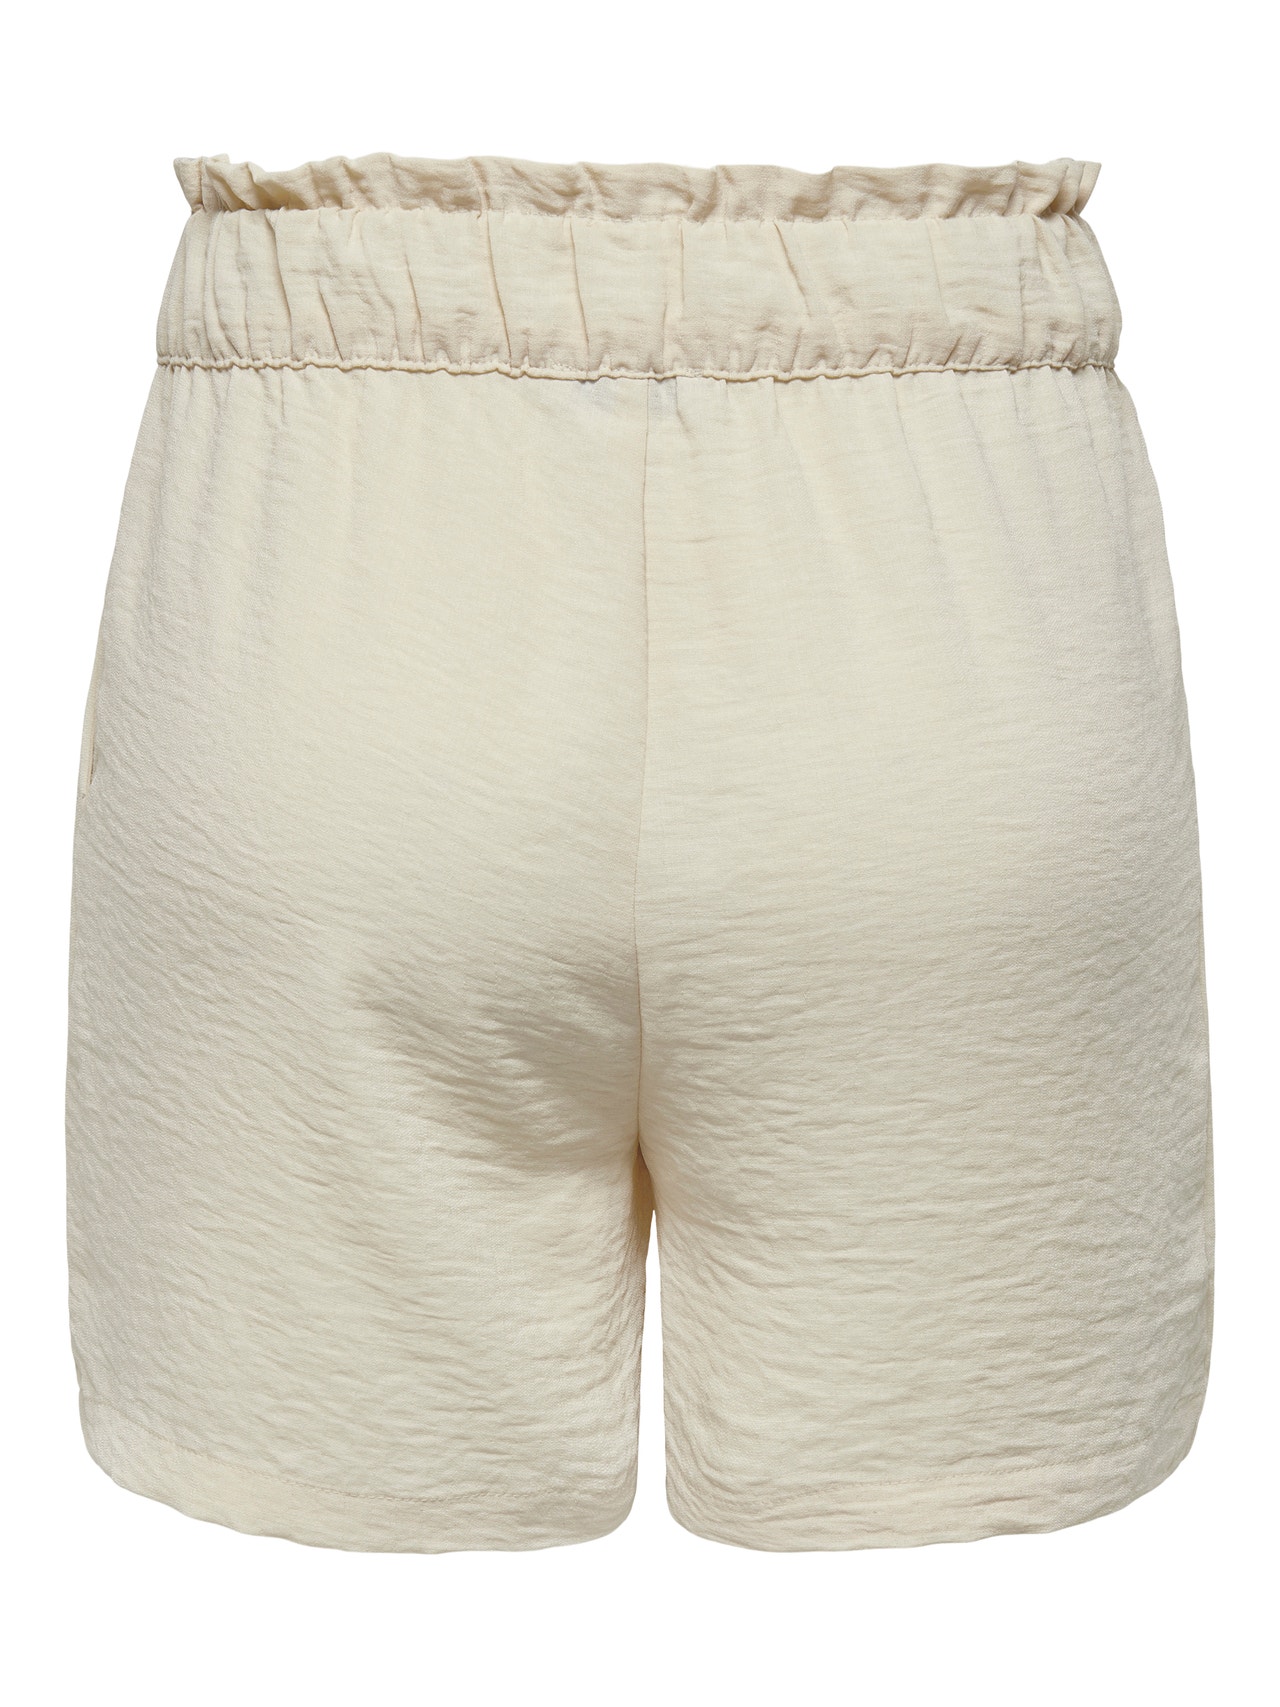 ONLY Normal geschnitten Hohe Taille Shorts -Sandshell - 15254848